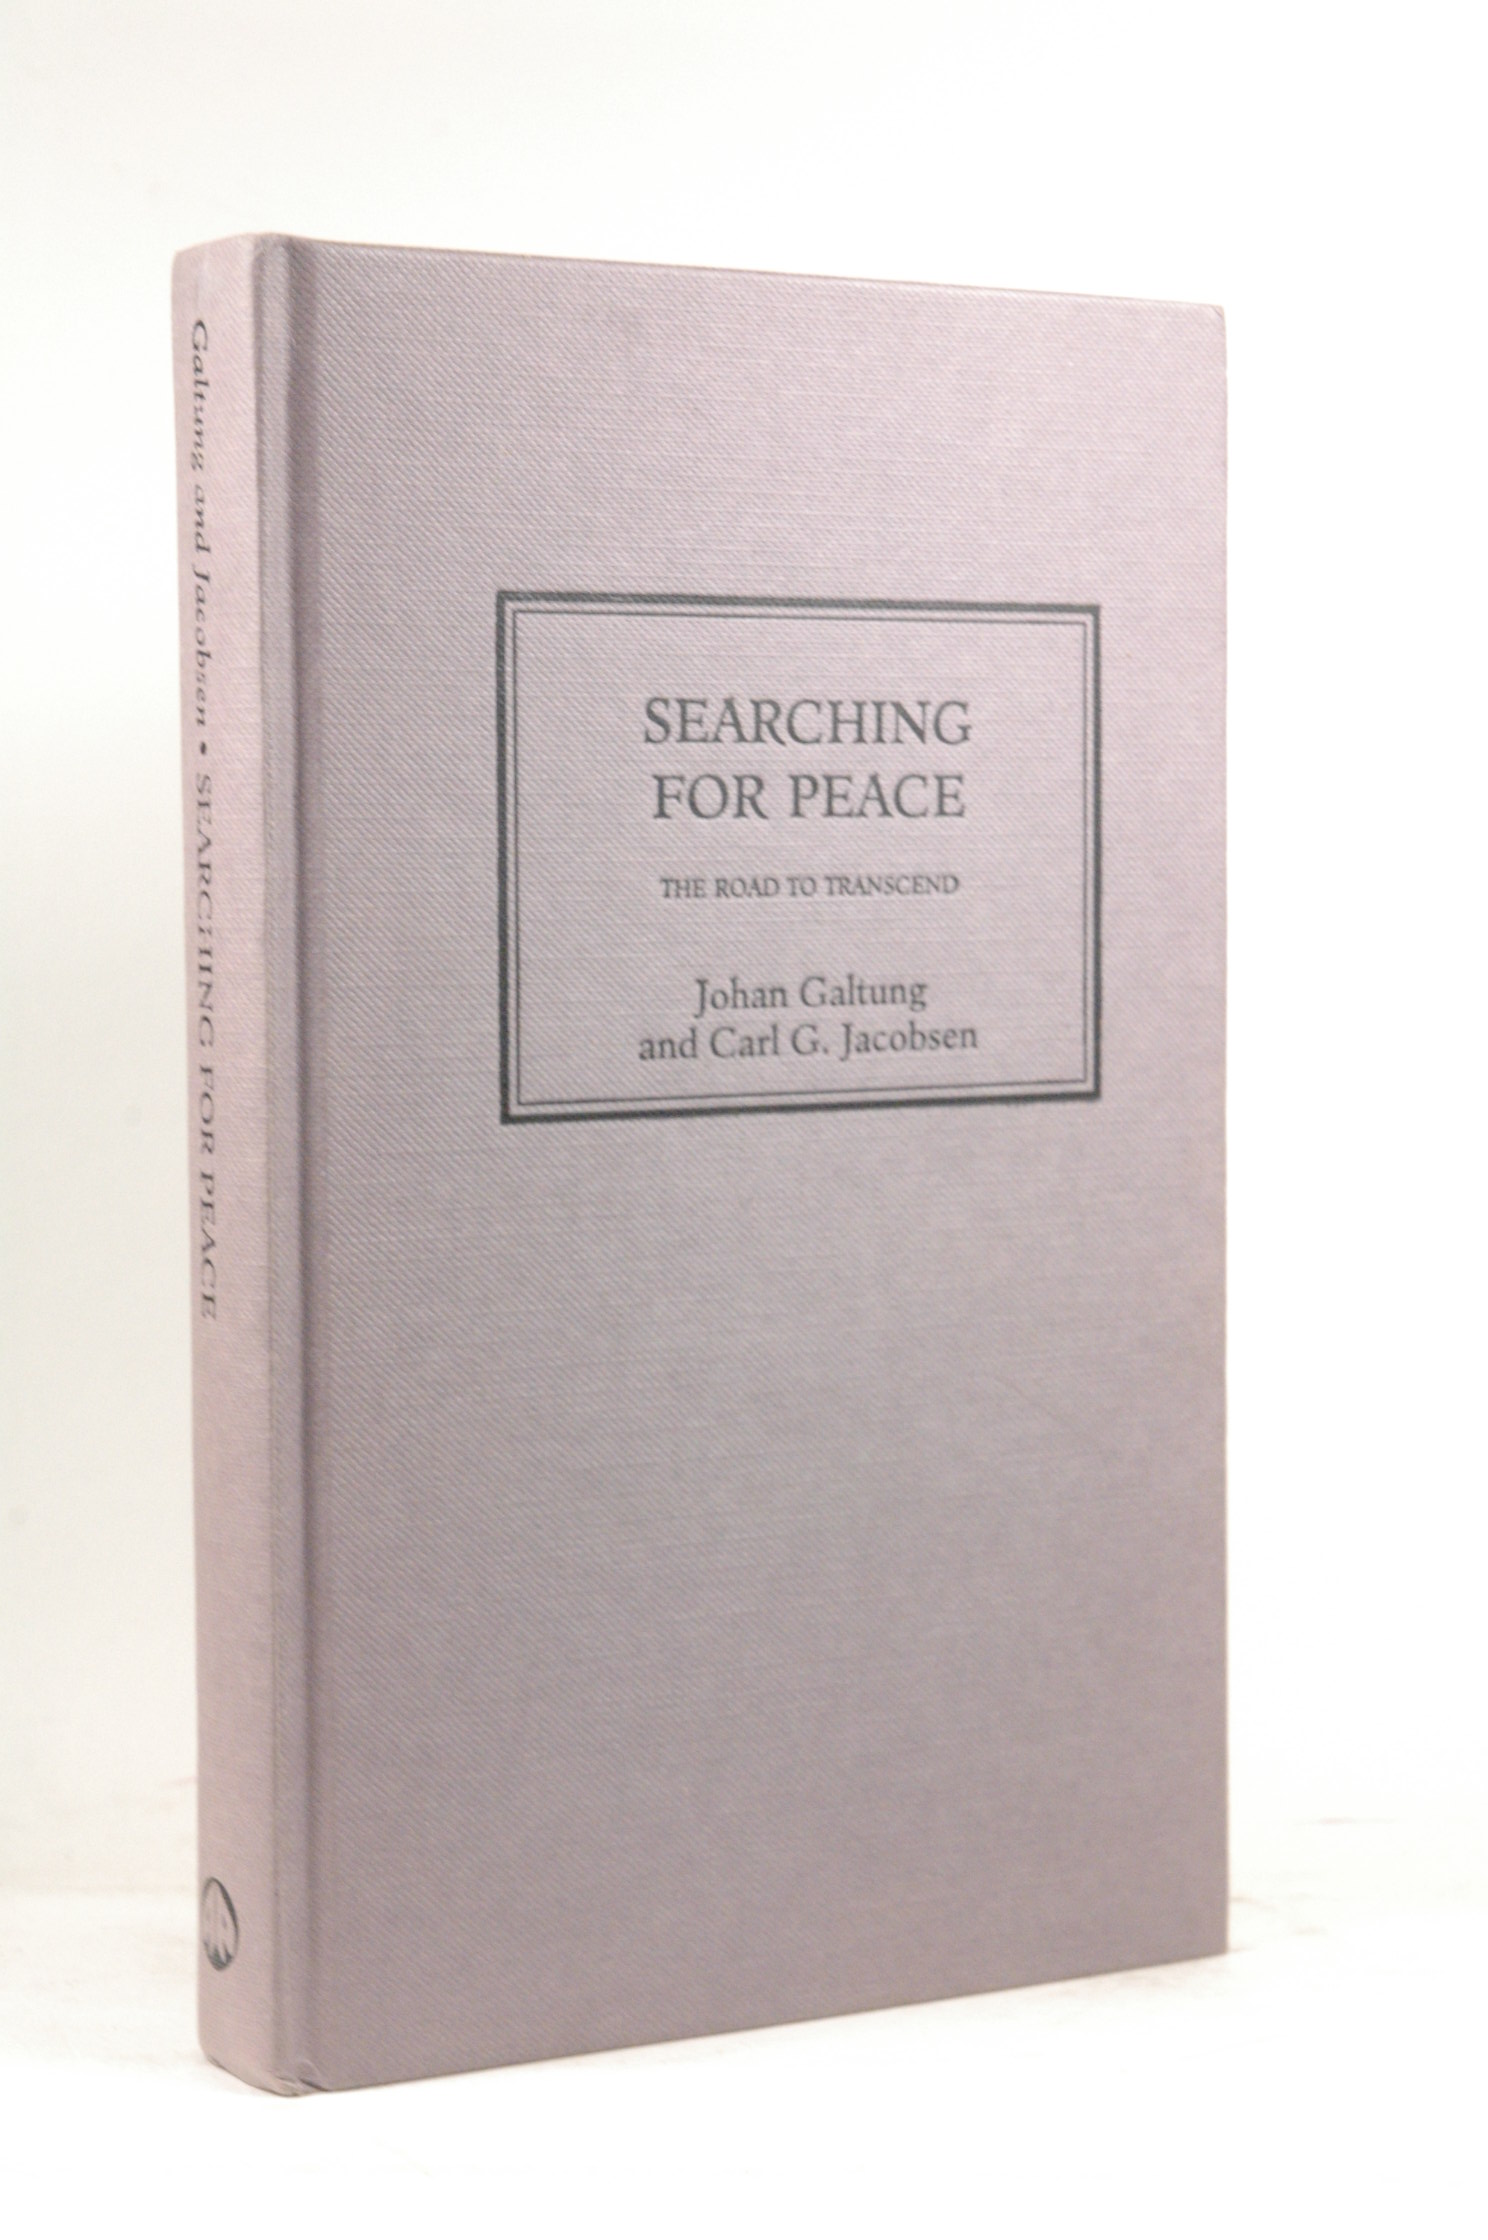 Searching for Peace: The Road to Conflict Transcendence in the Twenty-first Century